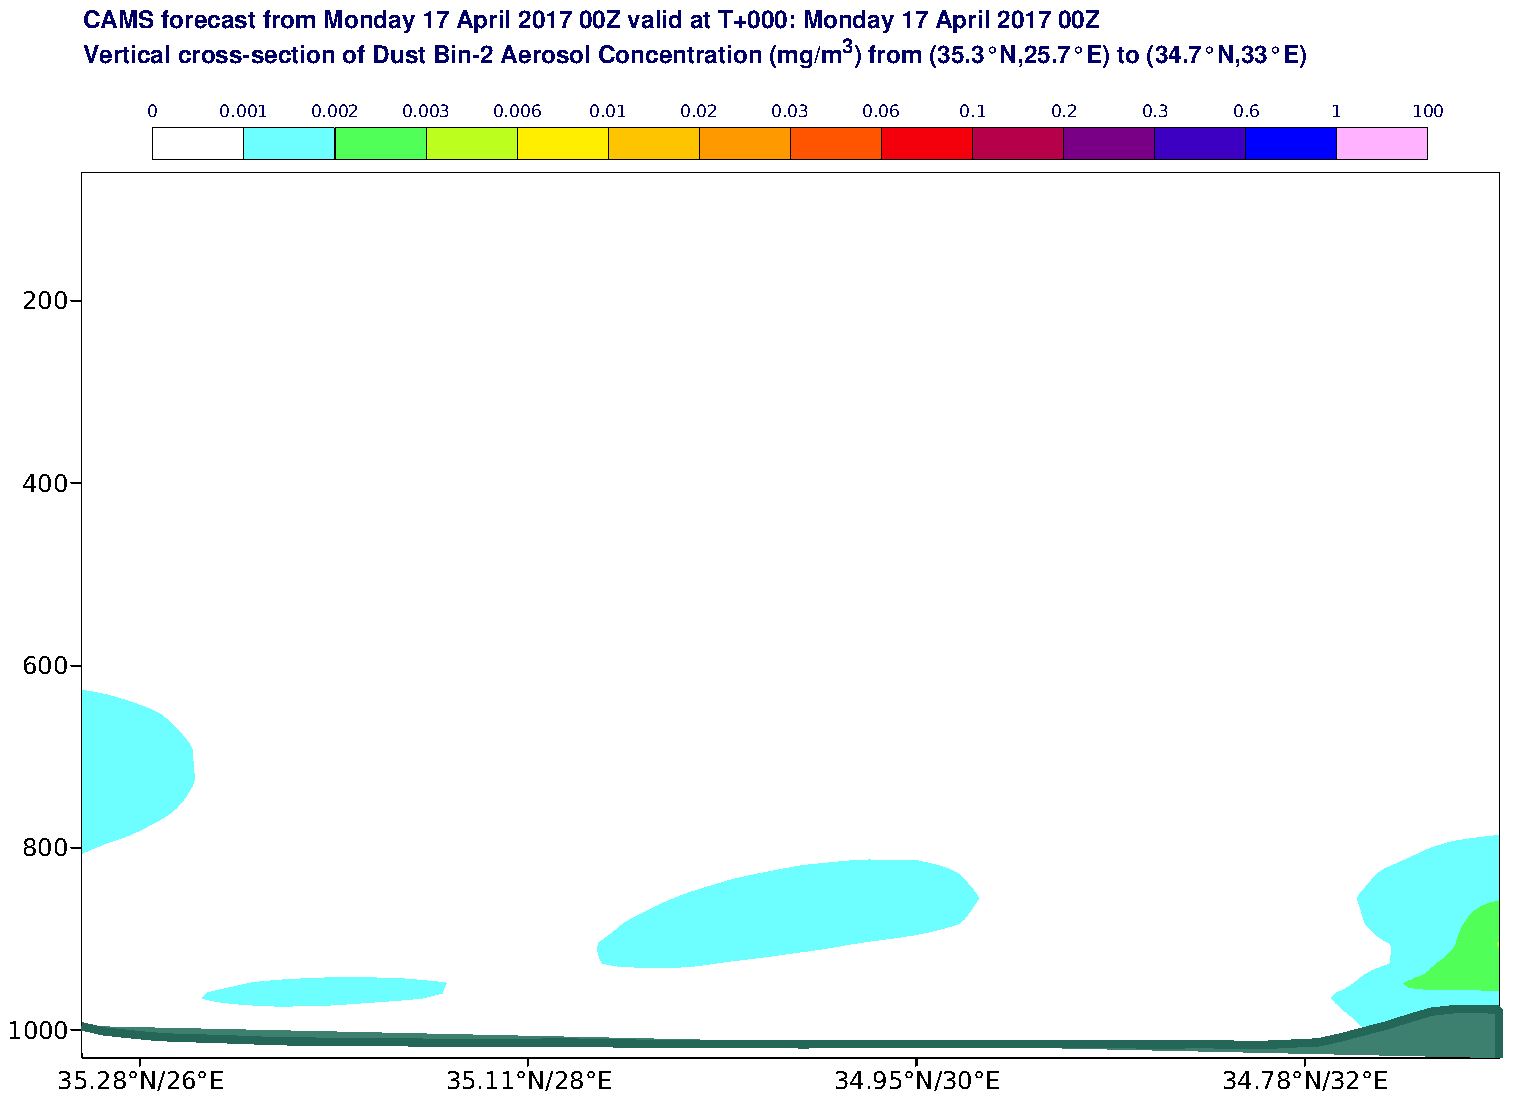 Vertical cross-section of Dust Bin-2 Aerosol Concentration (mg/m3) valid at T0 - 2017-04-17 00:00